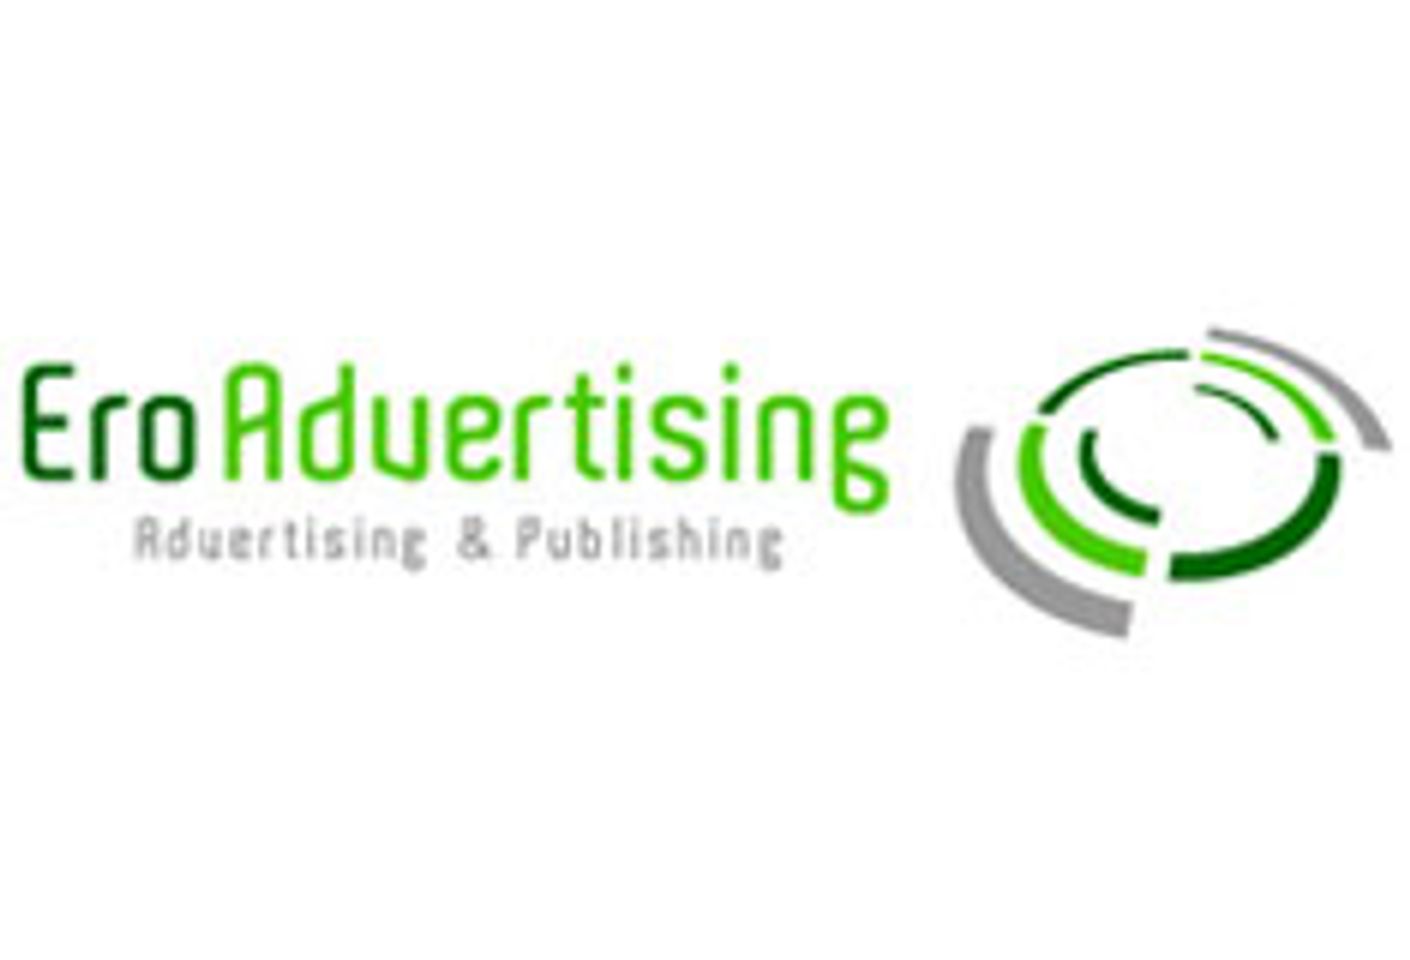 EroAdvertising Launches New 'In-Video Ad Plug-in'